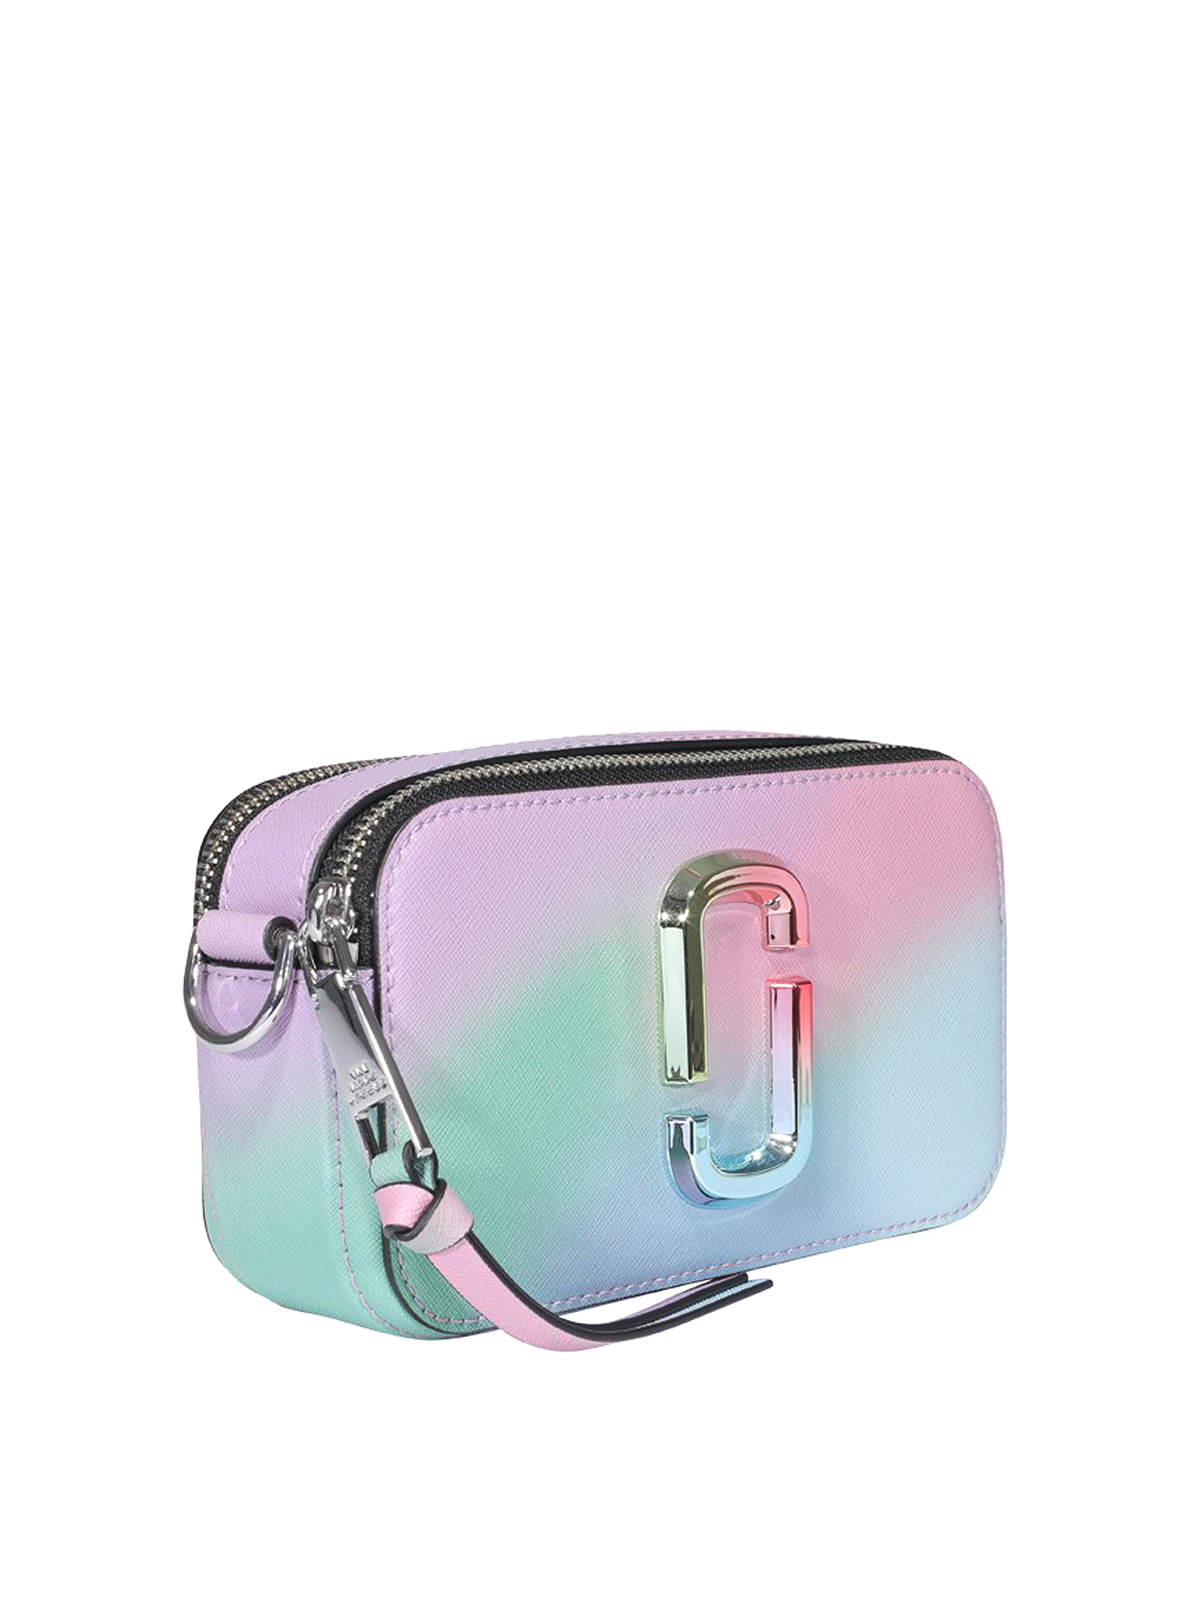 Marc Jacobs The Airbrushed Snapshot Camera Bag - Farfetch